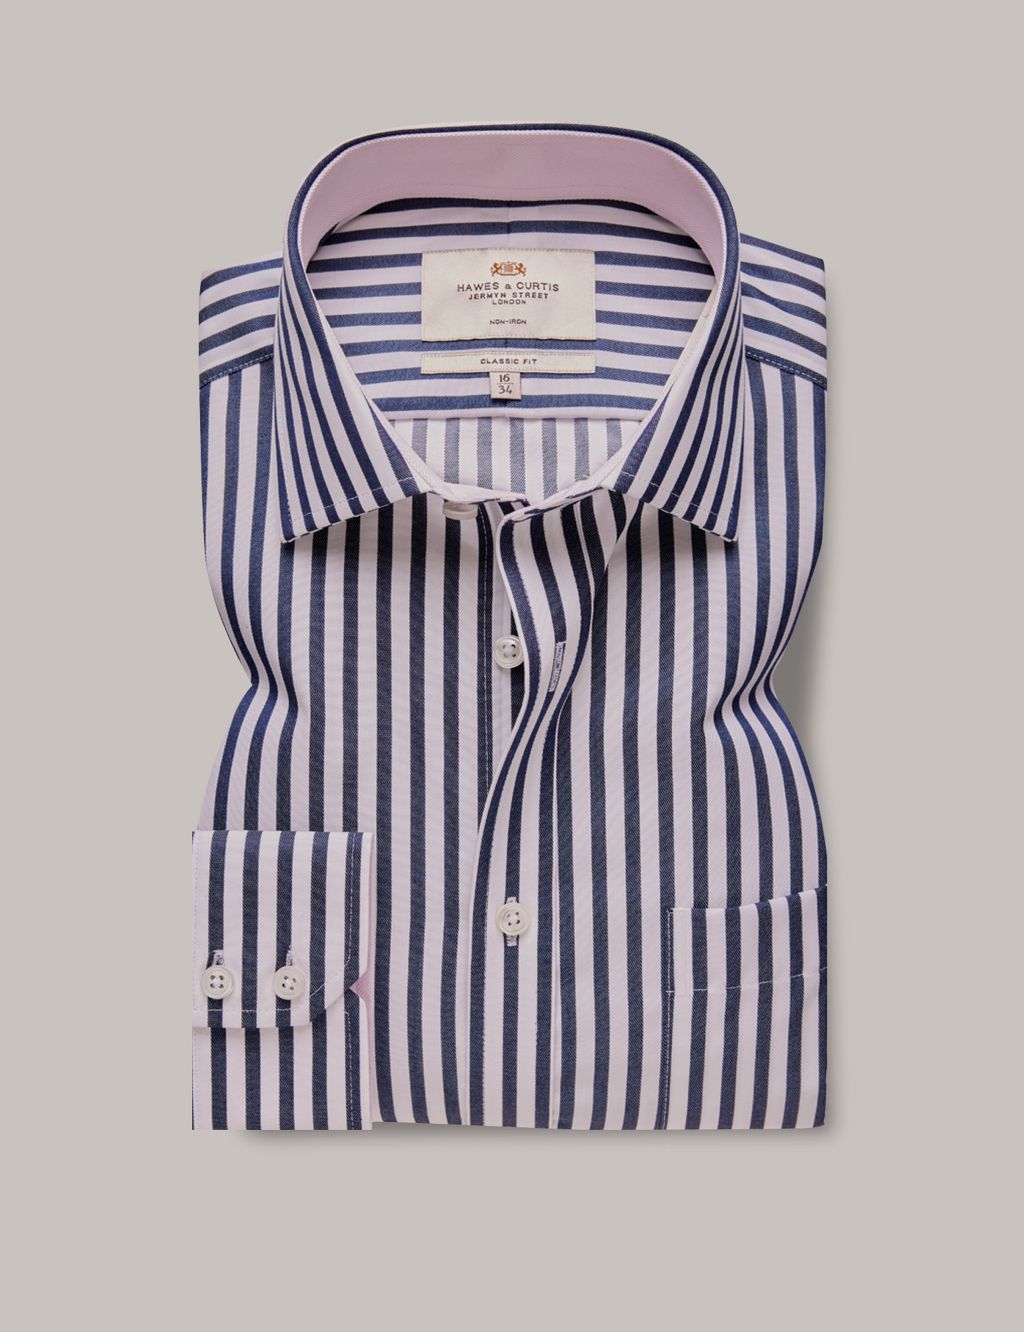 Slim Fit Non Iron Pure Cotton Shirt | Hawes & Curtis | M&S